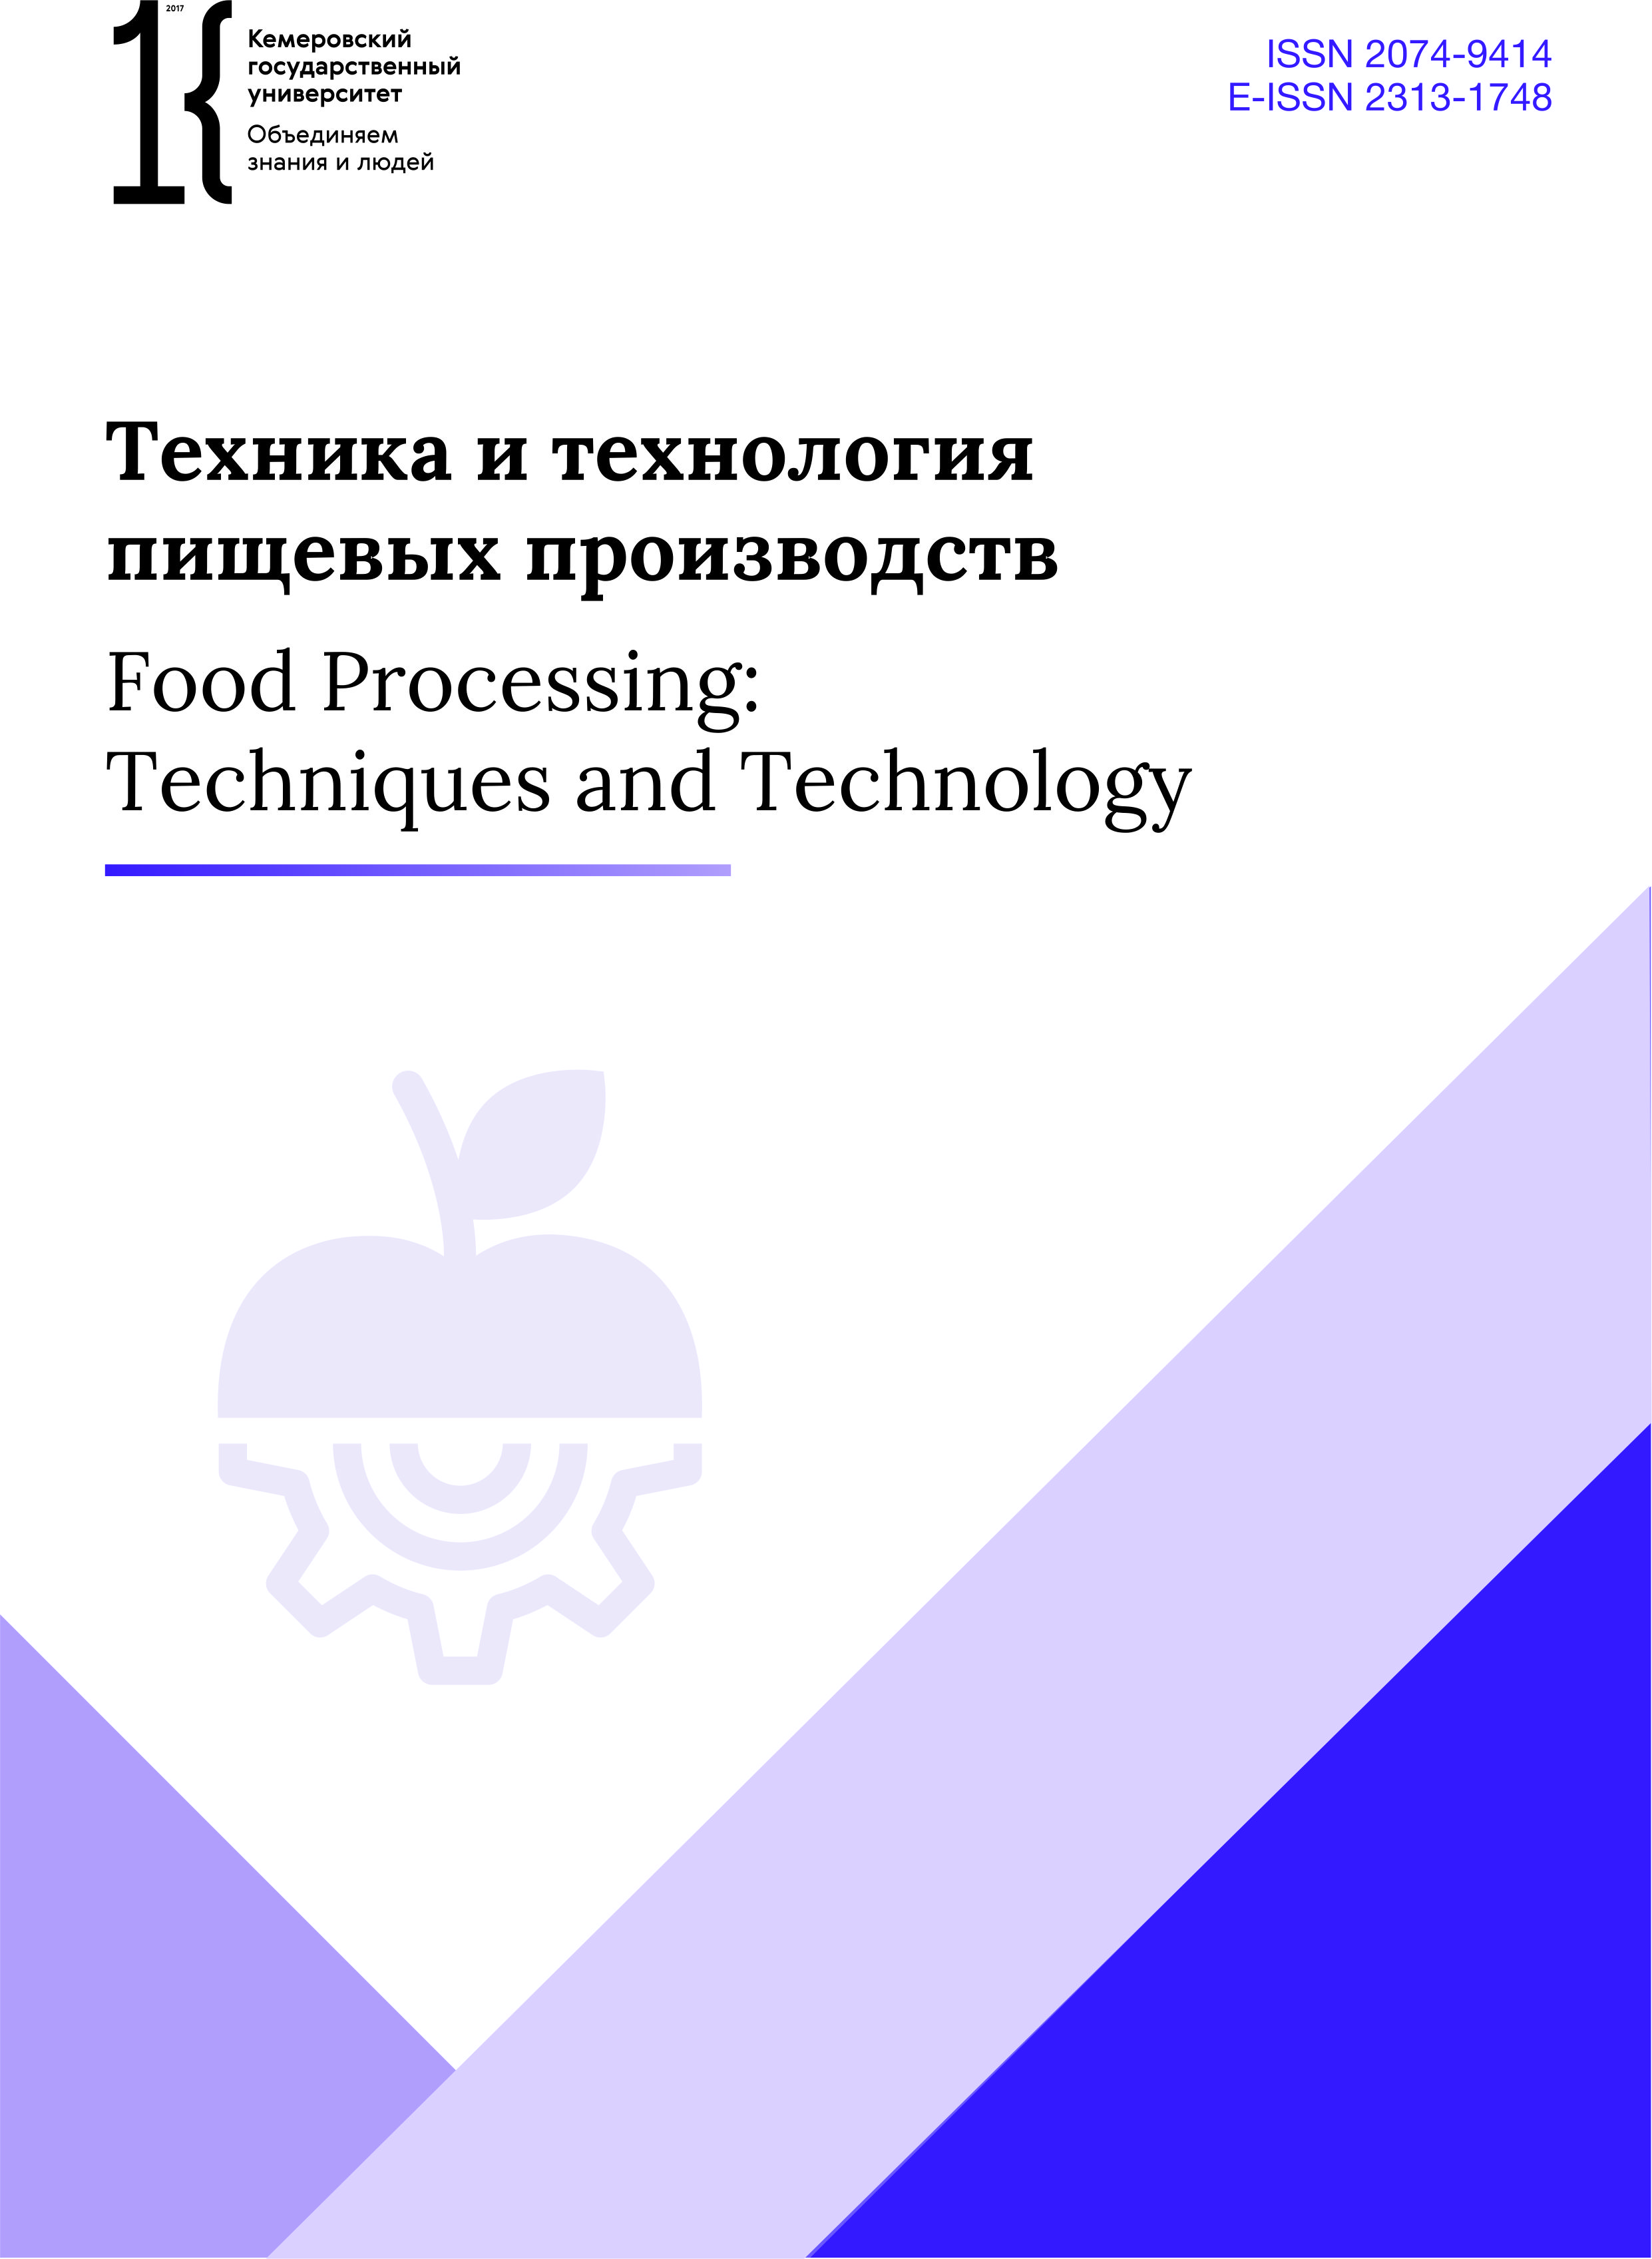             Food Processing: Techniques and Technology
    